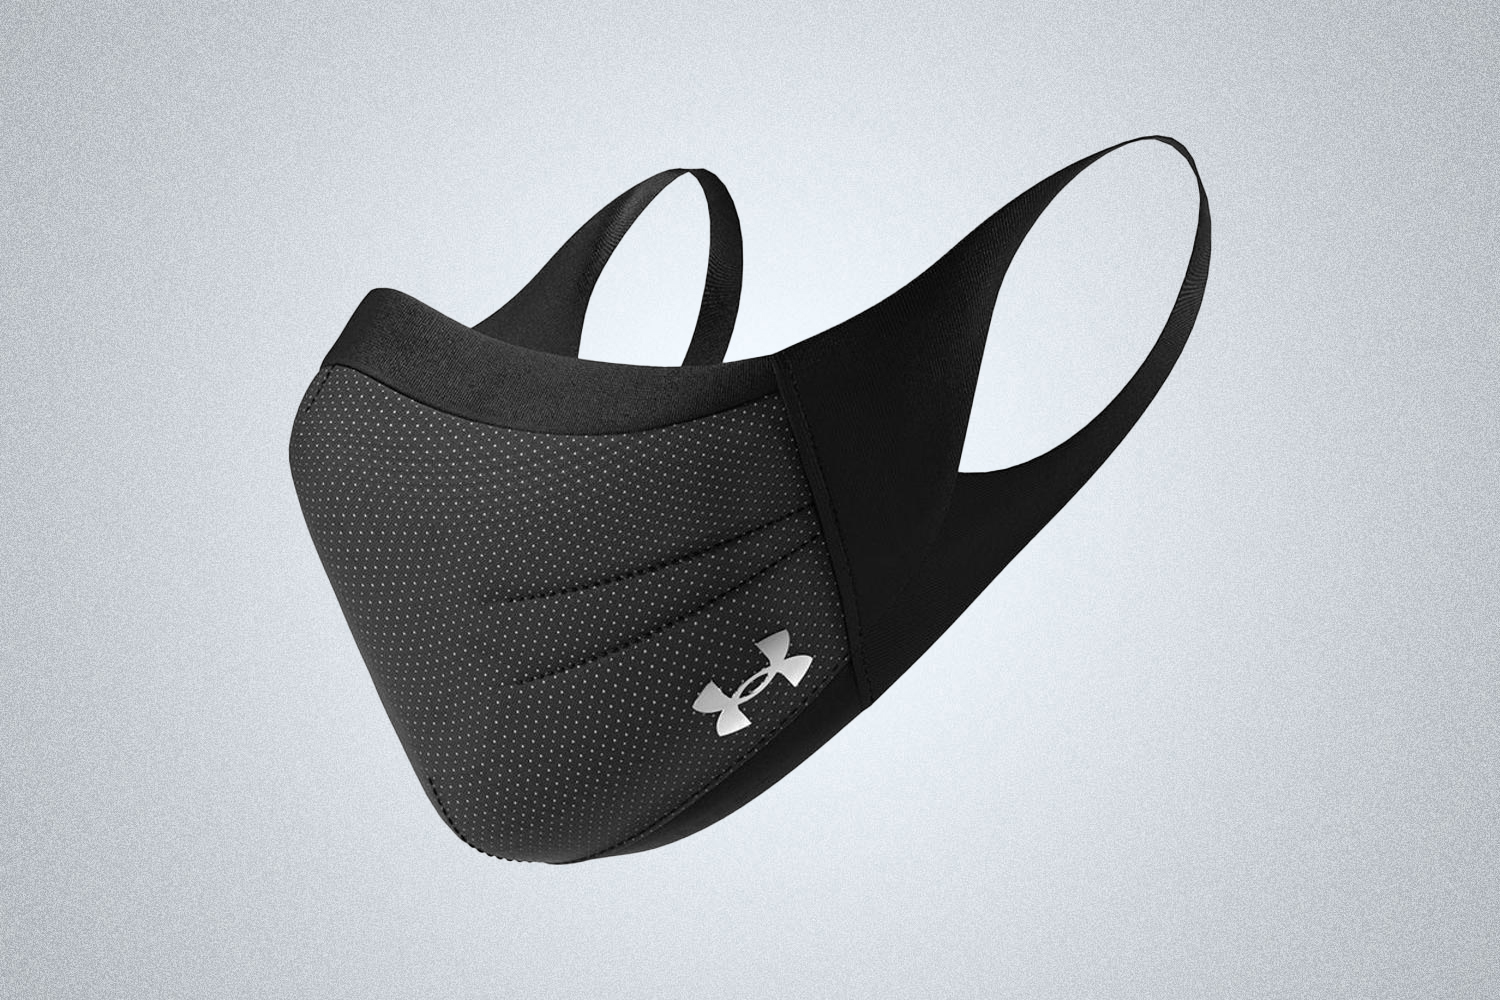 The Under Armour Sportsmask in black is the best mask for running and working out due its breathability and ligthweight design